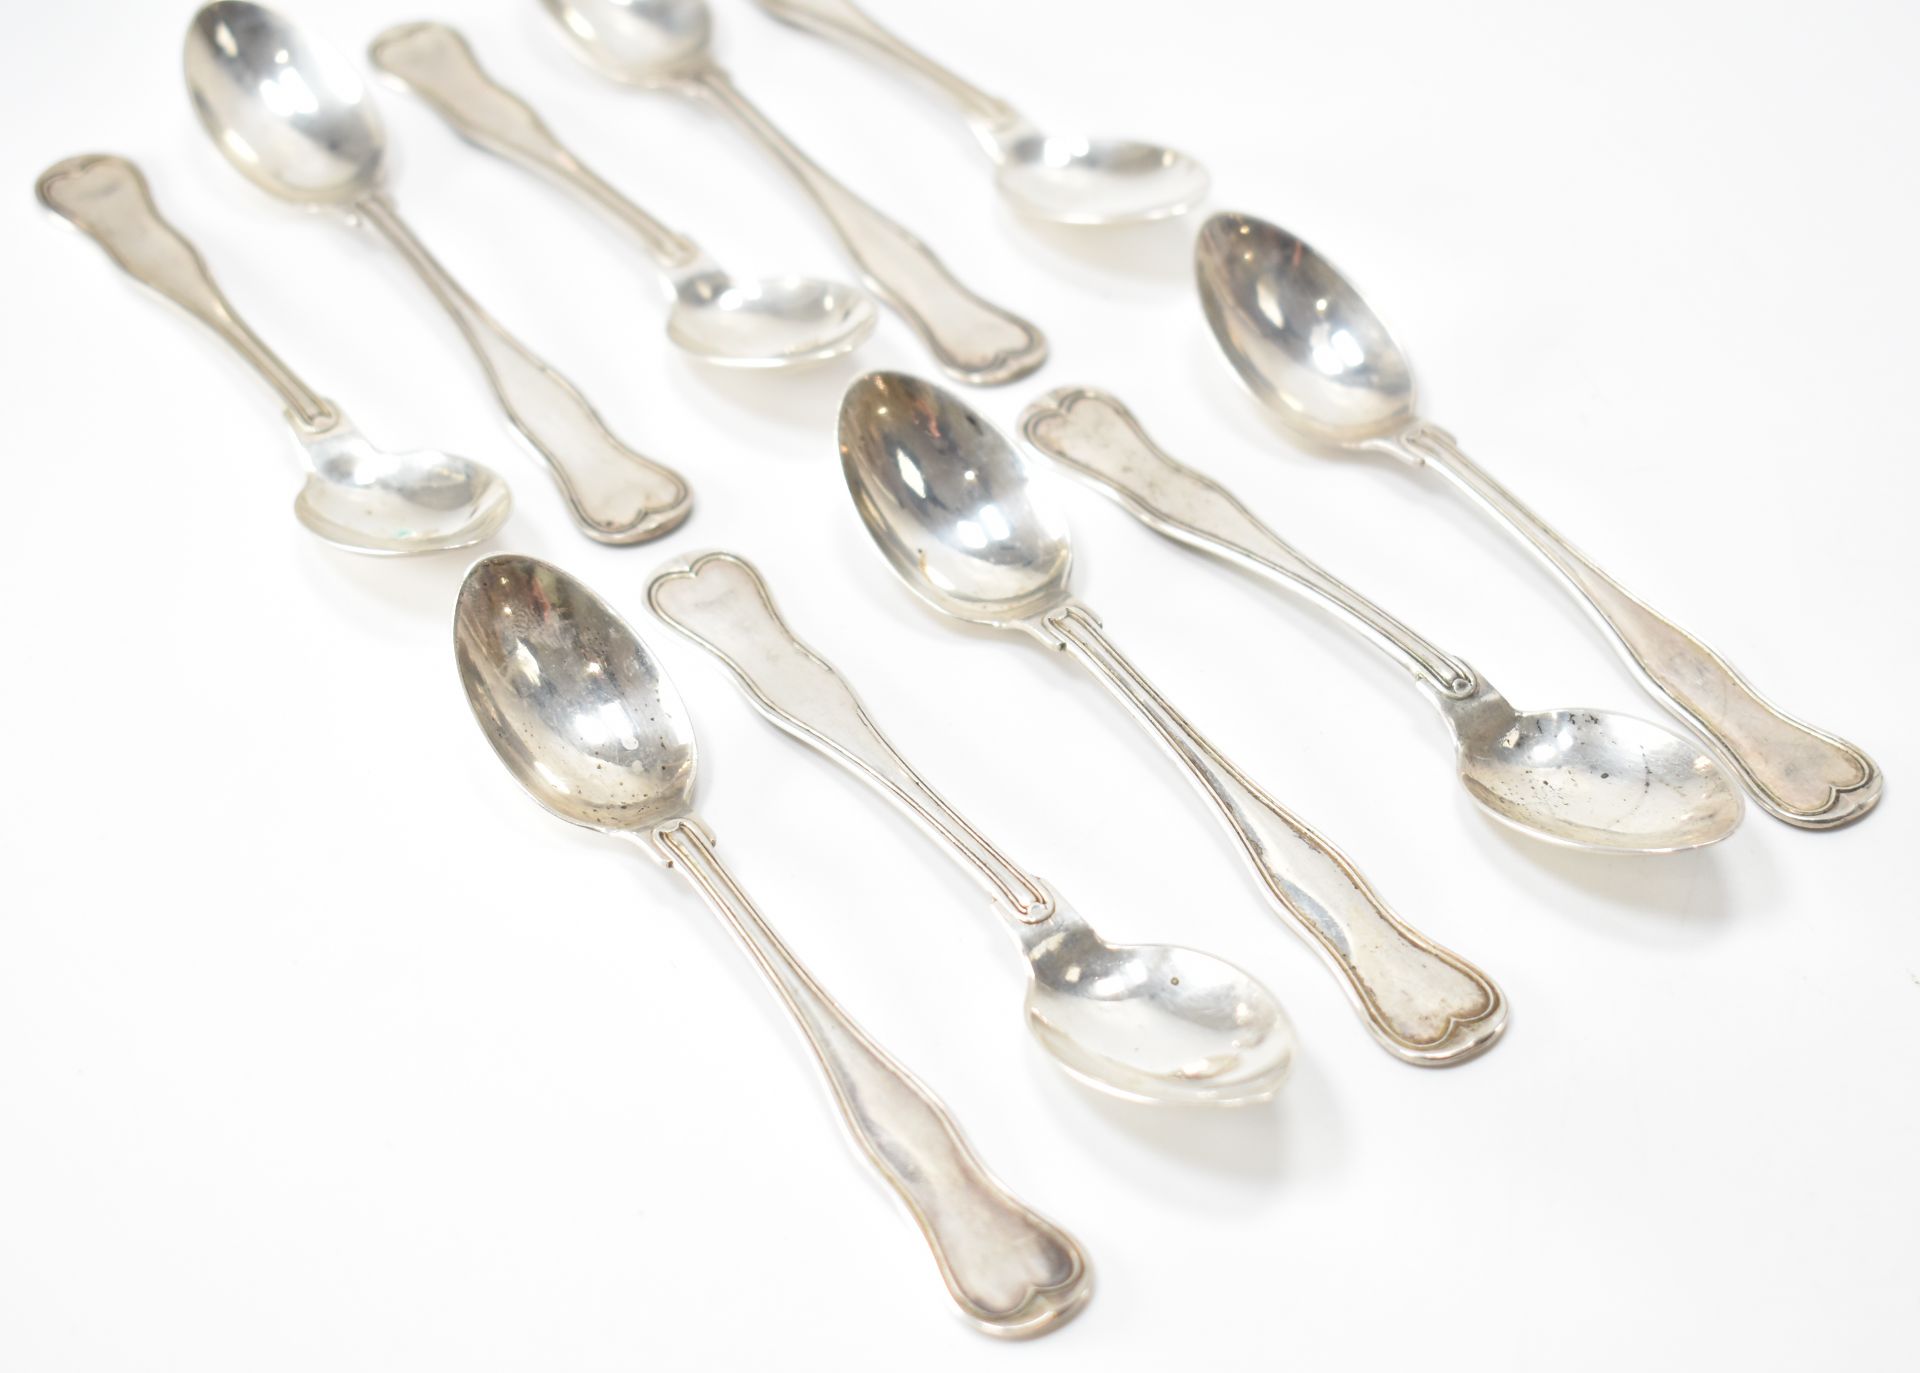 SET OF 10 ANTIQUE AUSTRO HUNGARIAN SILVER TEASPOONS - Image 3 of 6